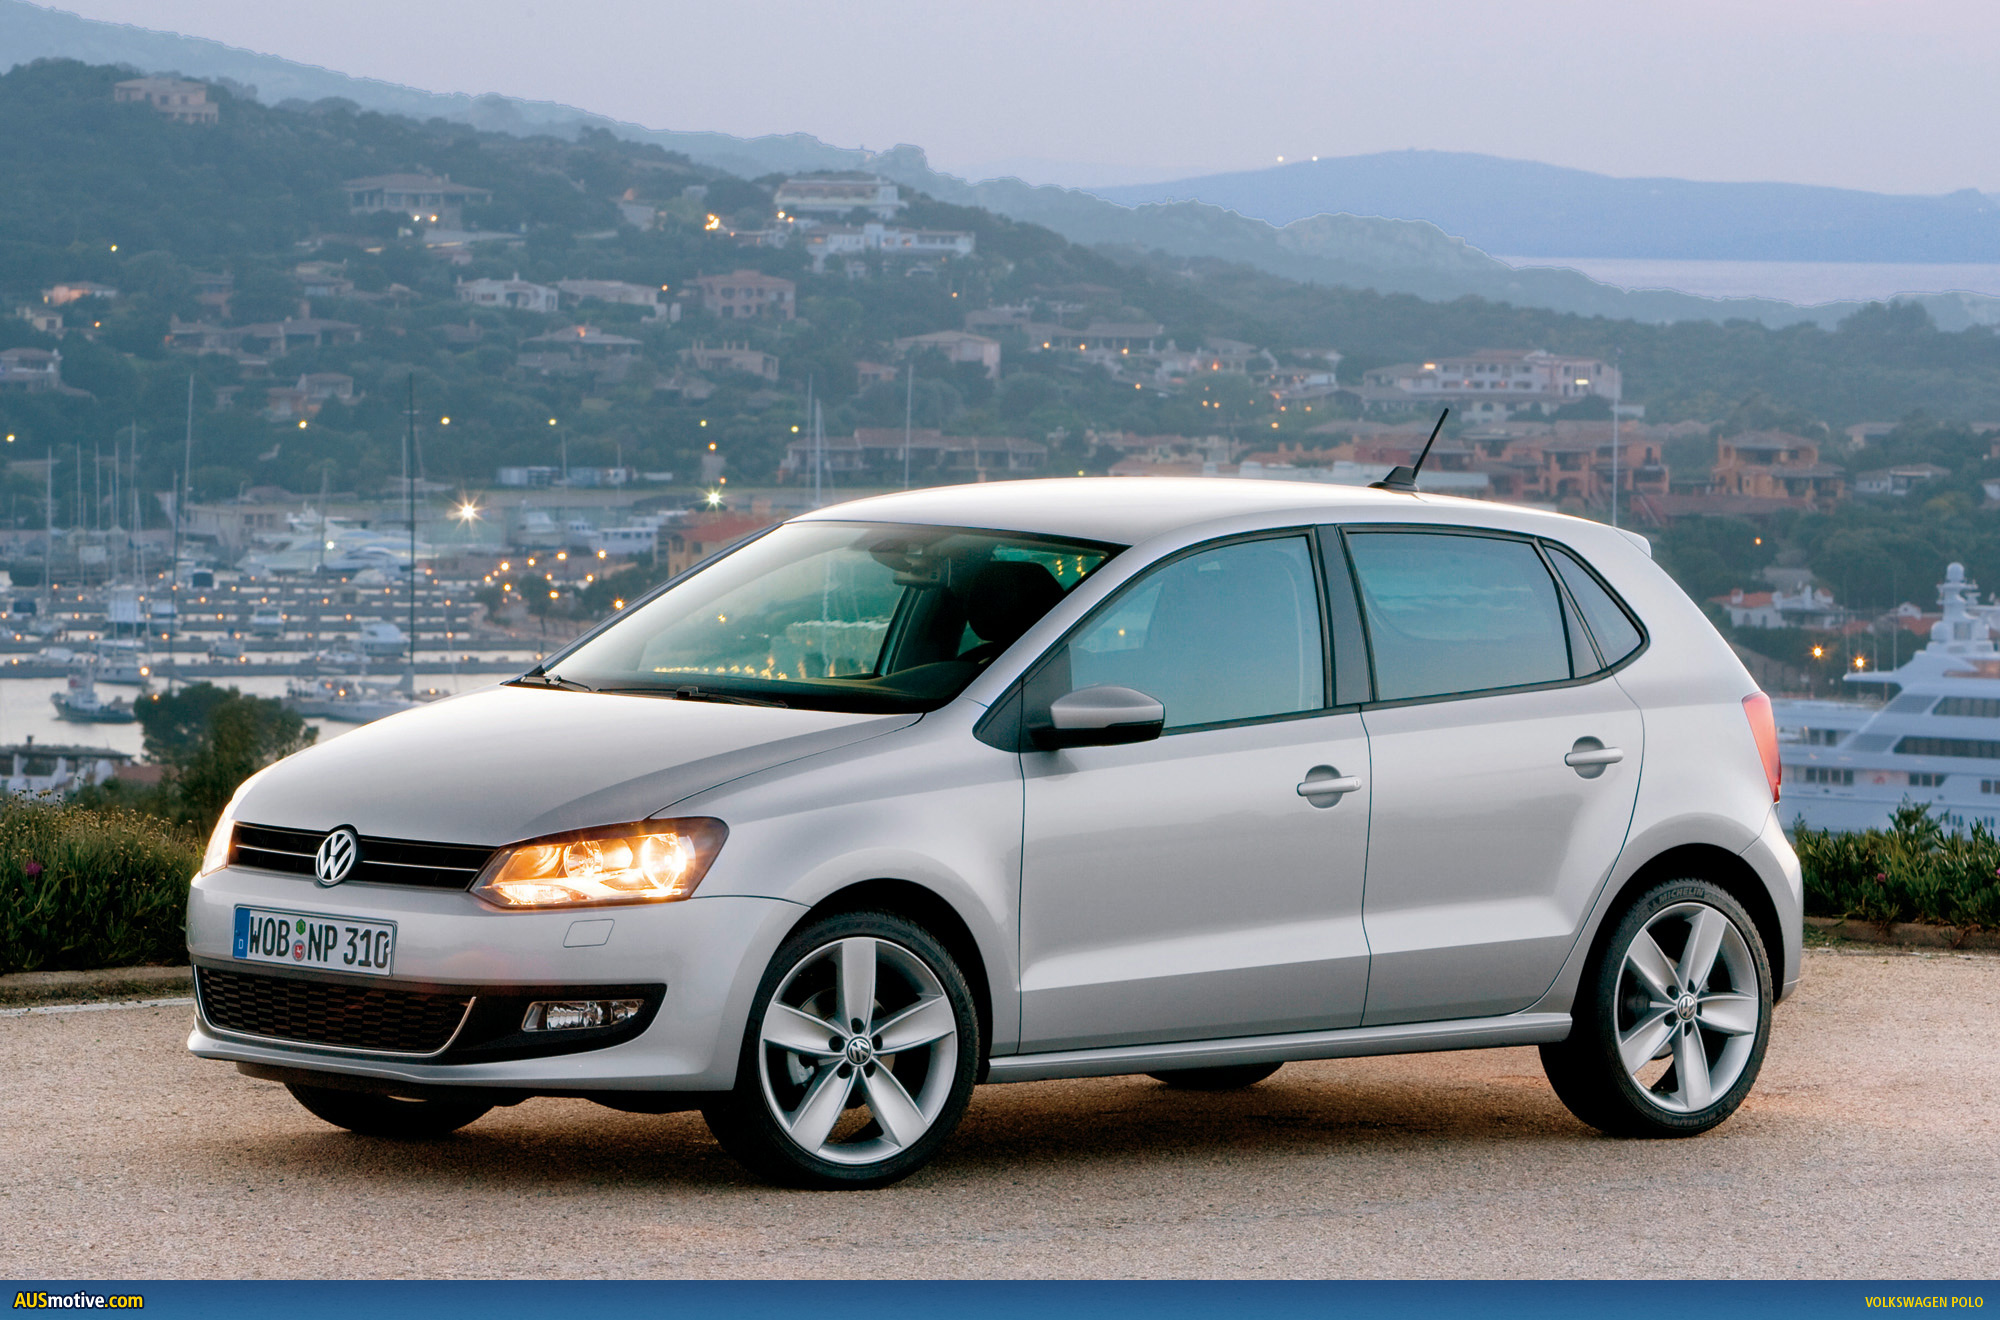 » Volkswagen Polo World Car of the Year 2010